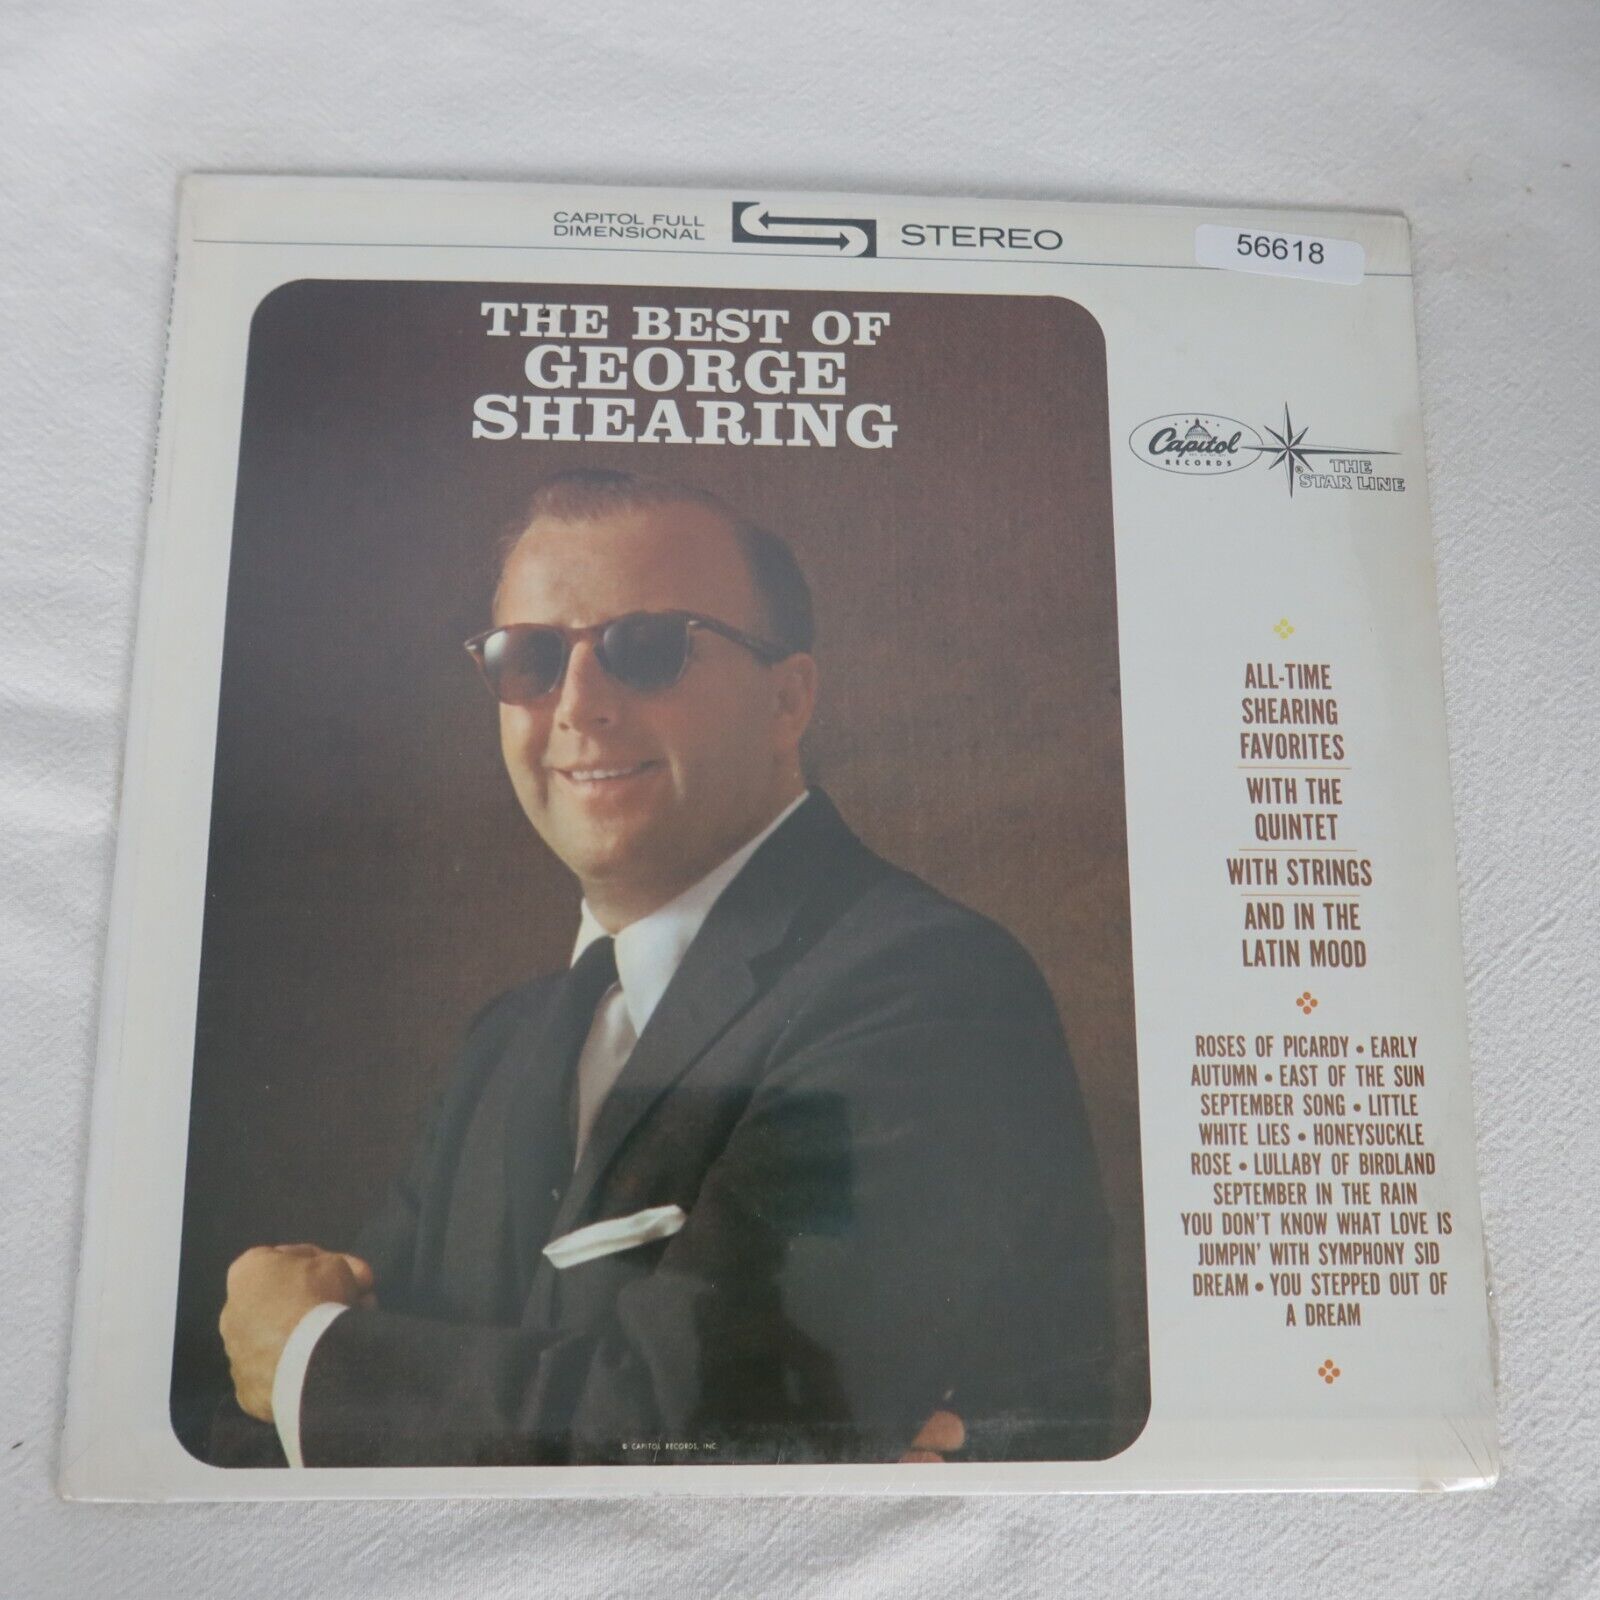 NEW George Shearing The Best Of CAPITOL w/ Shrink LP Vinyl Record Album